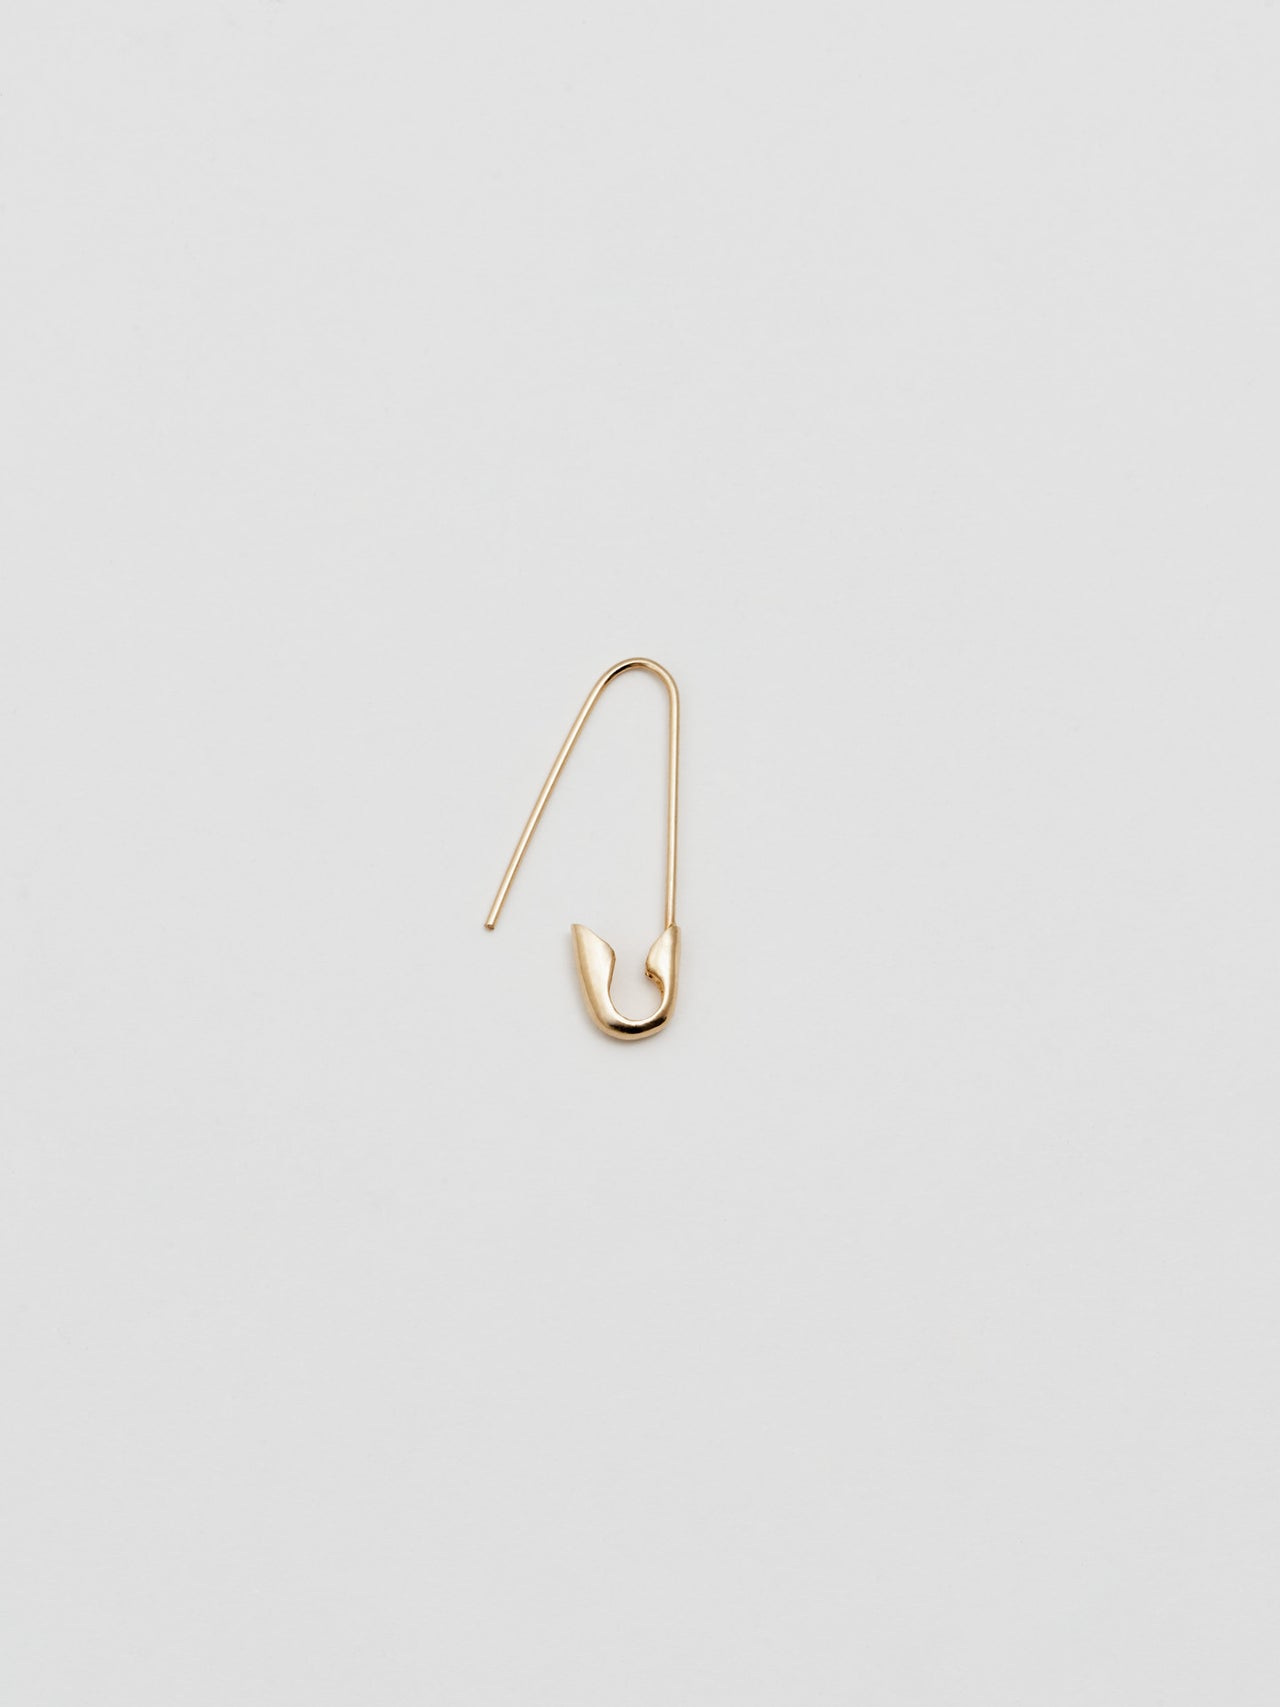 Safety Pin Earring in 14k Yellow Gold